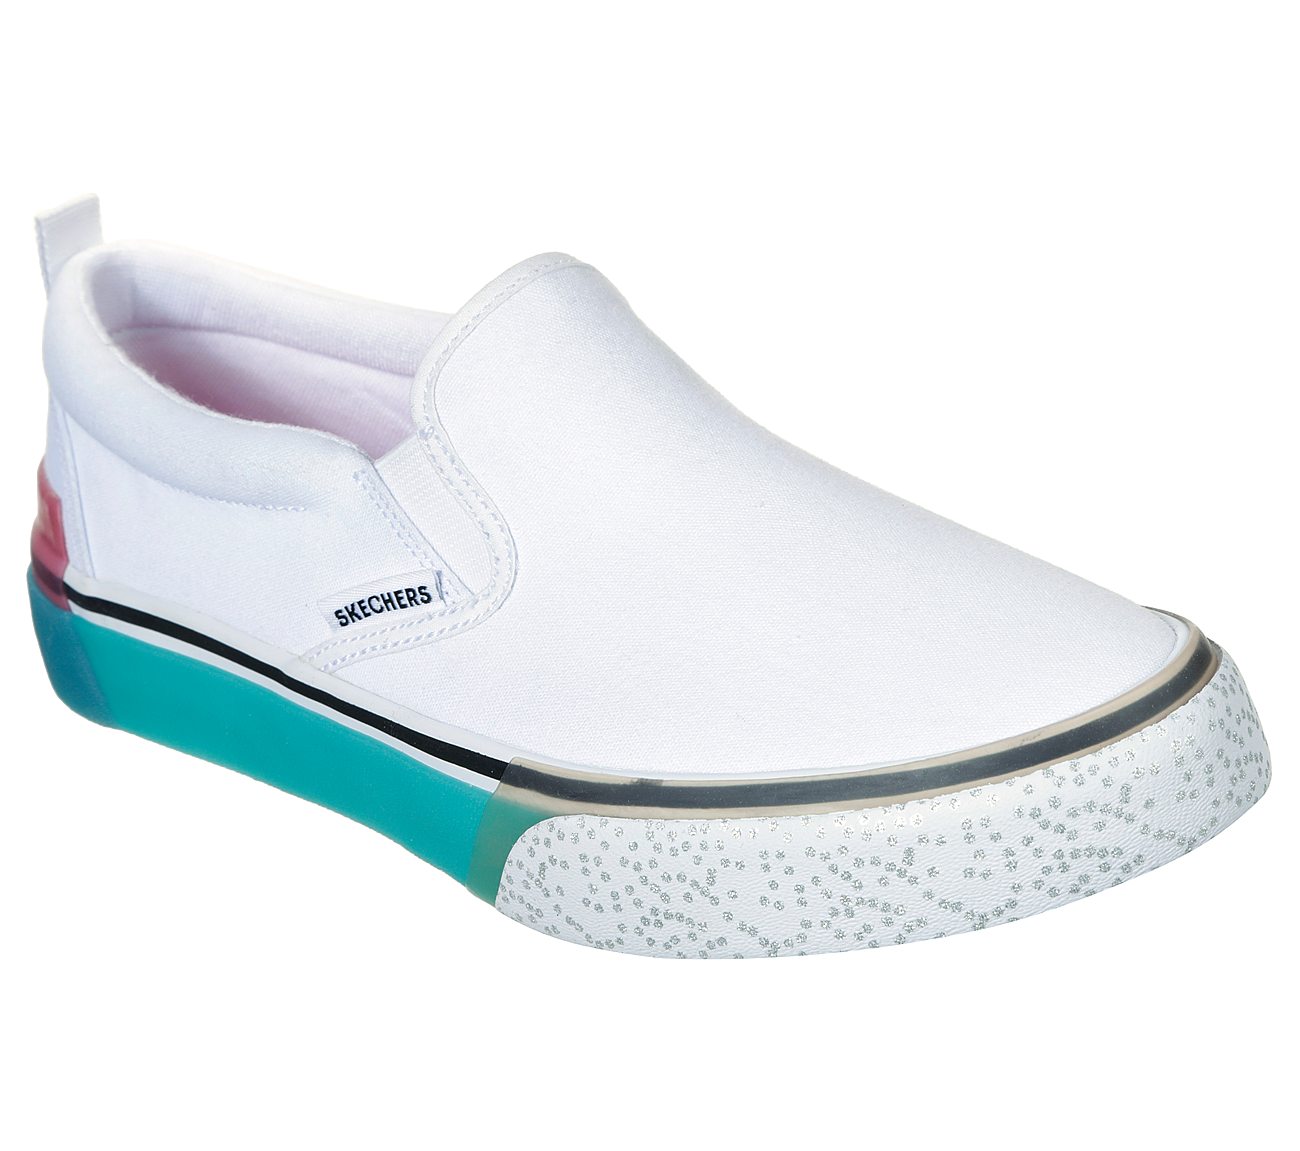 SPARKED - COOL AS ICE, WWWHITE Footwear Right View